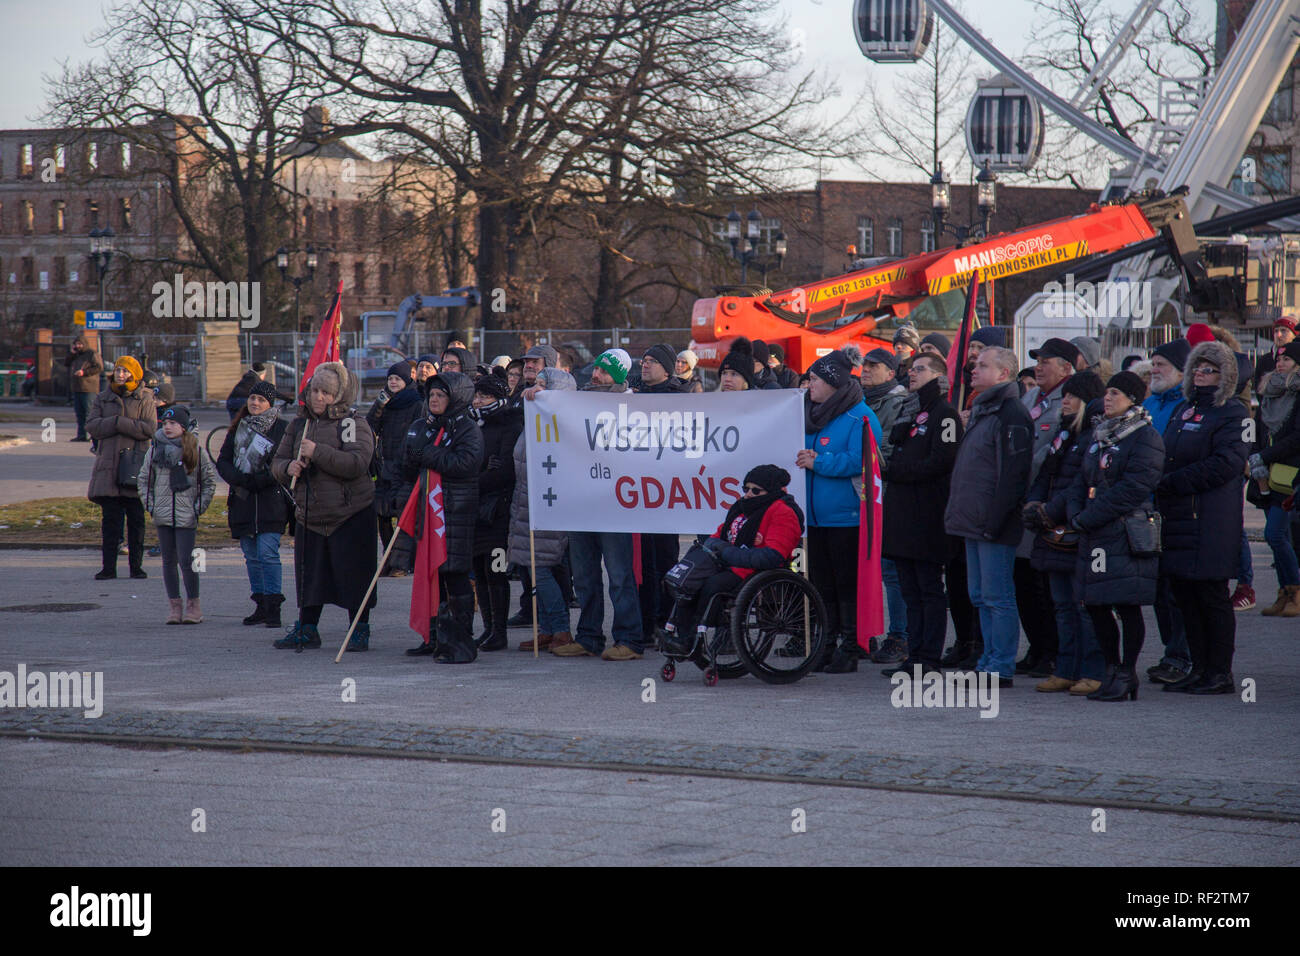 Citizens of city of Gdansk mourning its murdered mayor Pawel Adamowicz during his funeral day Stock Photo